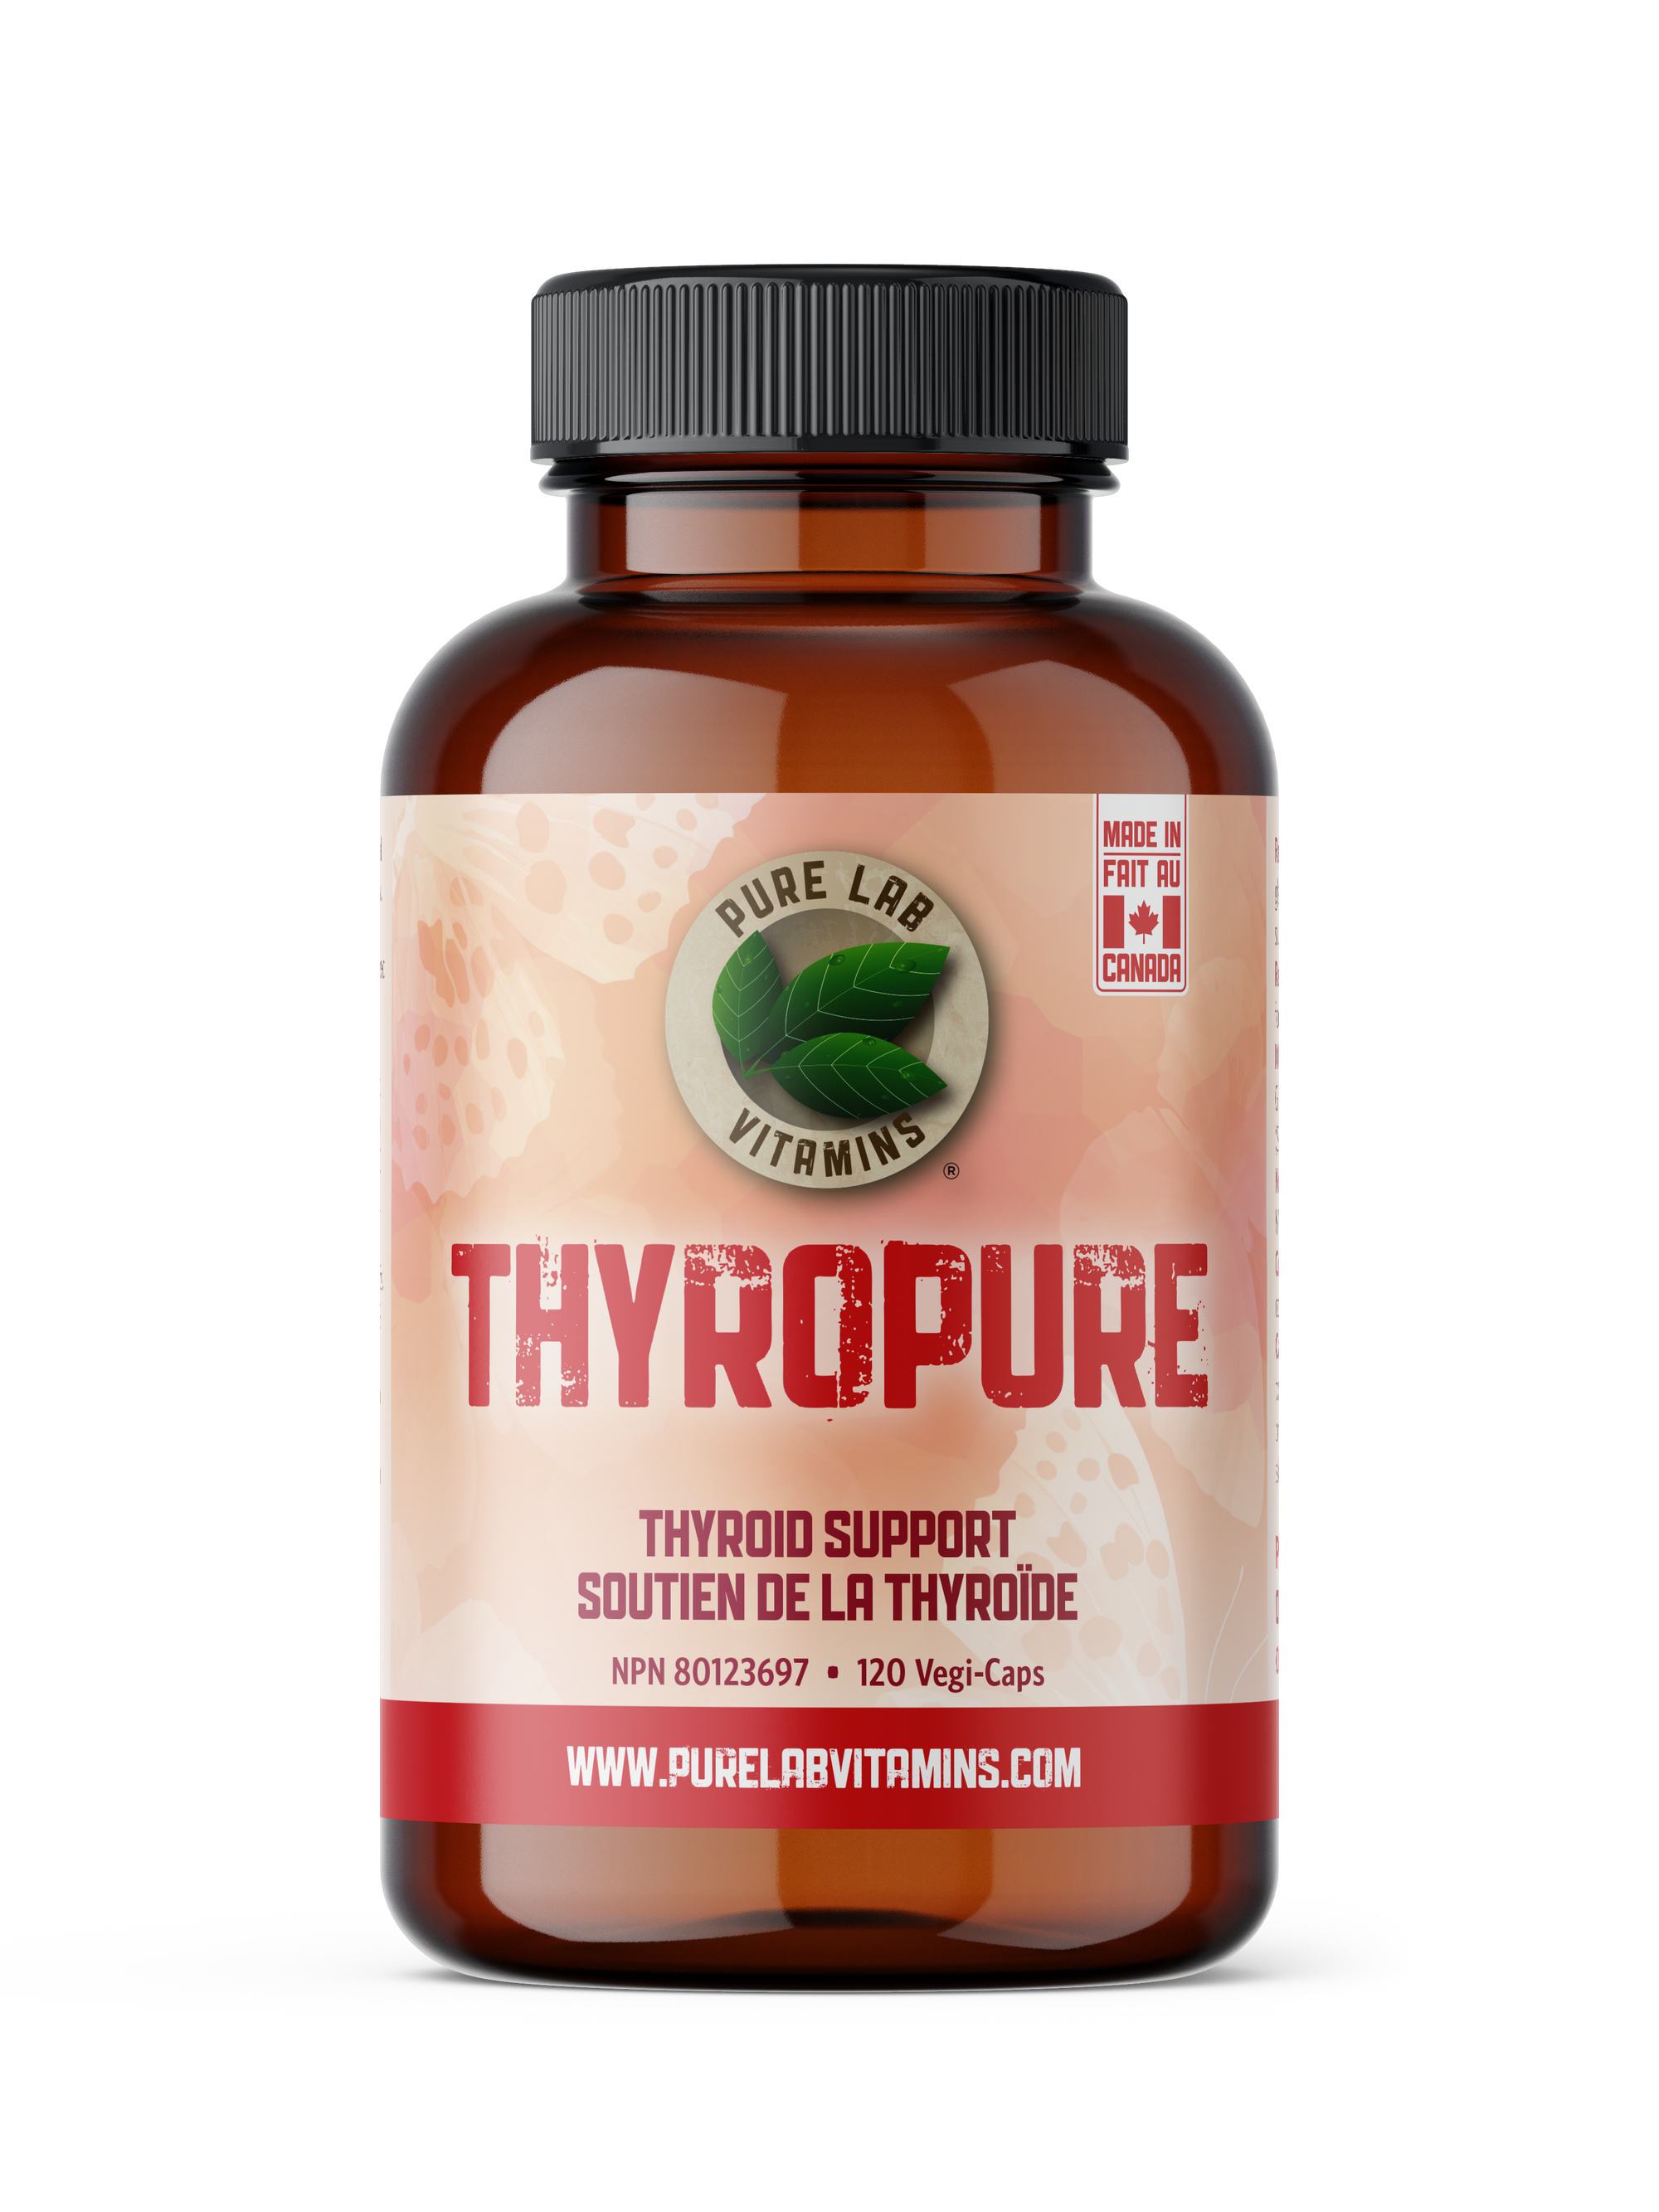 Innovation at the Heart of Health – The Emergence of ThyroPure and AdaptaPure at Pure Lab Vitamins